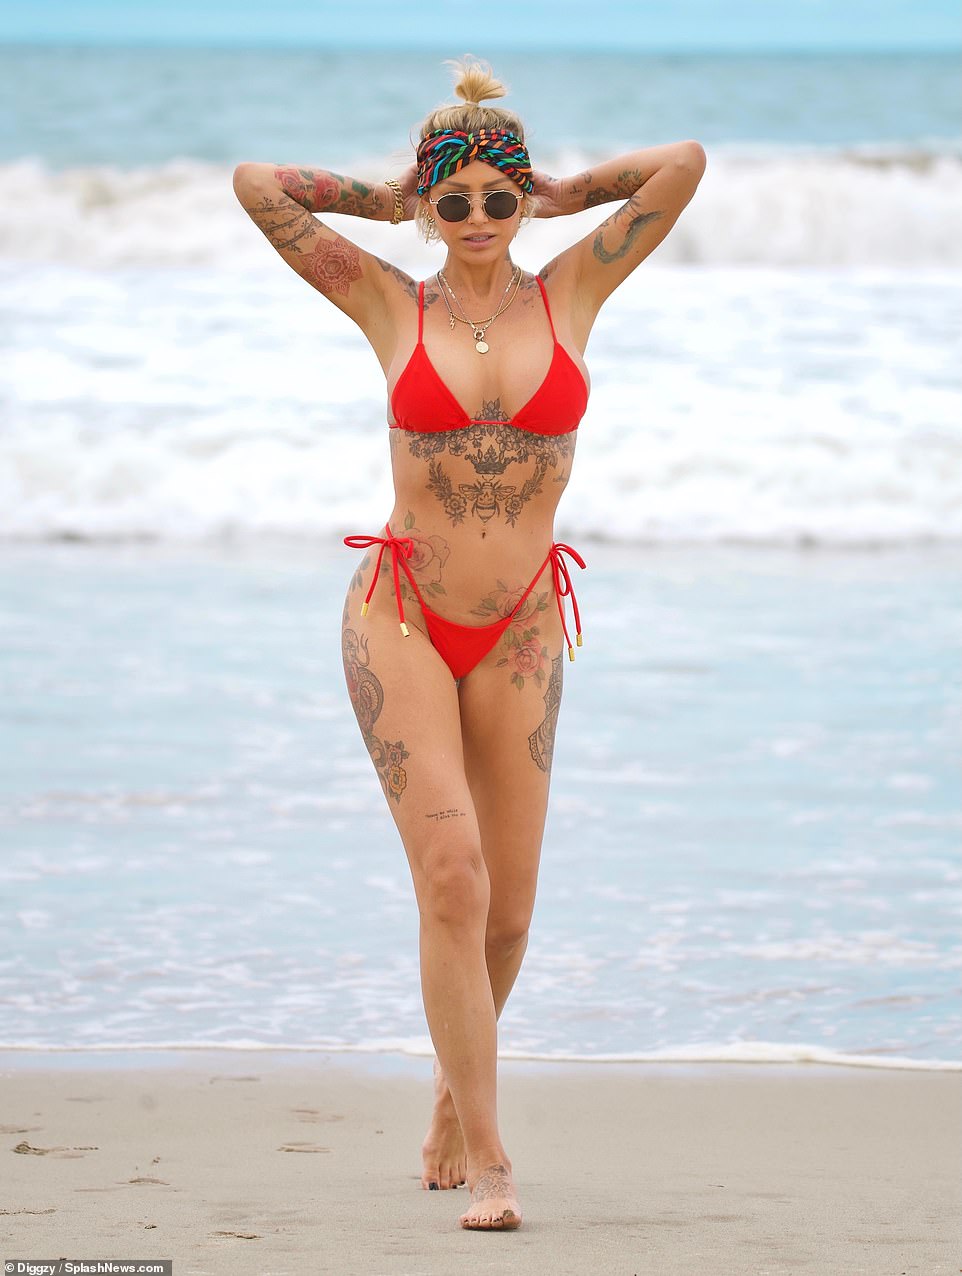 Va va voom: Tina showed off her ample assets in the tiny red string bikini as her bountiful cleavage and pert derriere were on full display